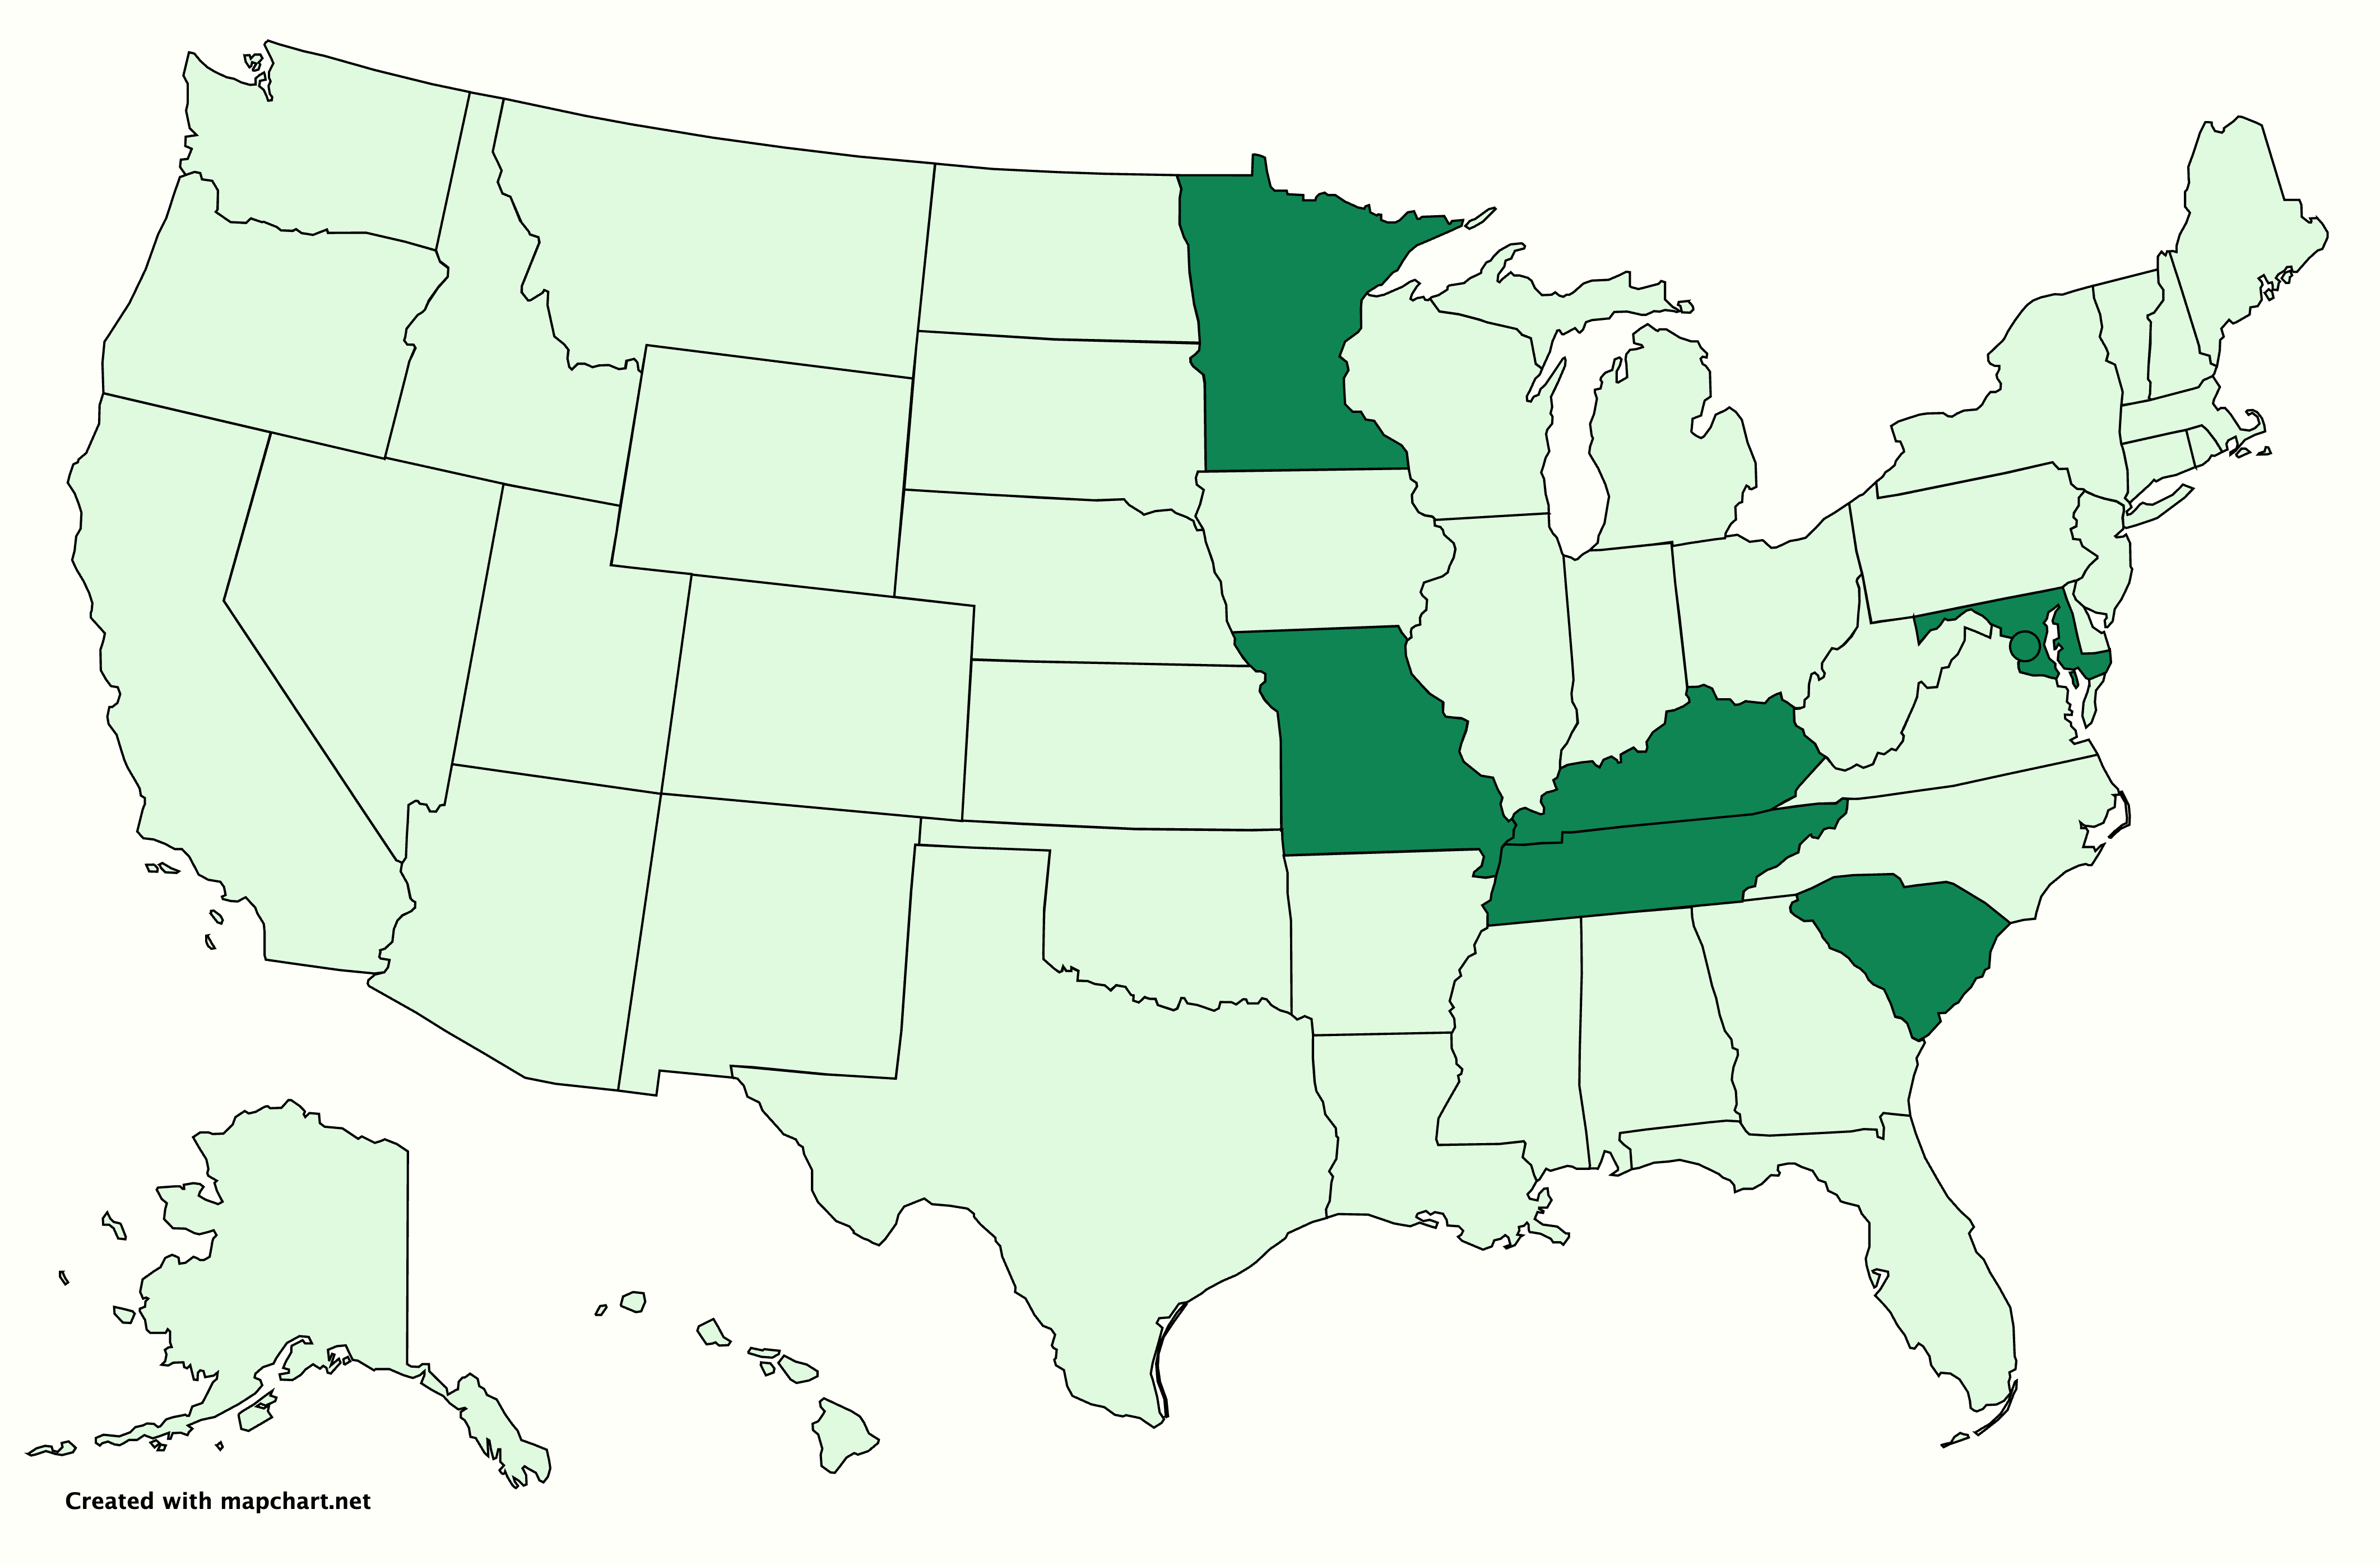 U.S. map with several states shaded in dark green